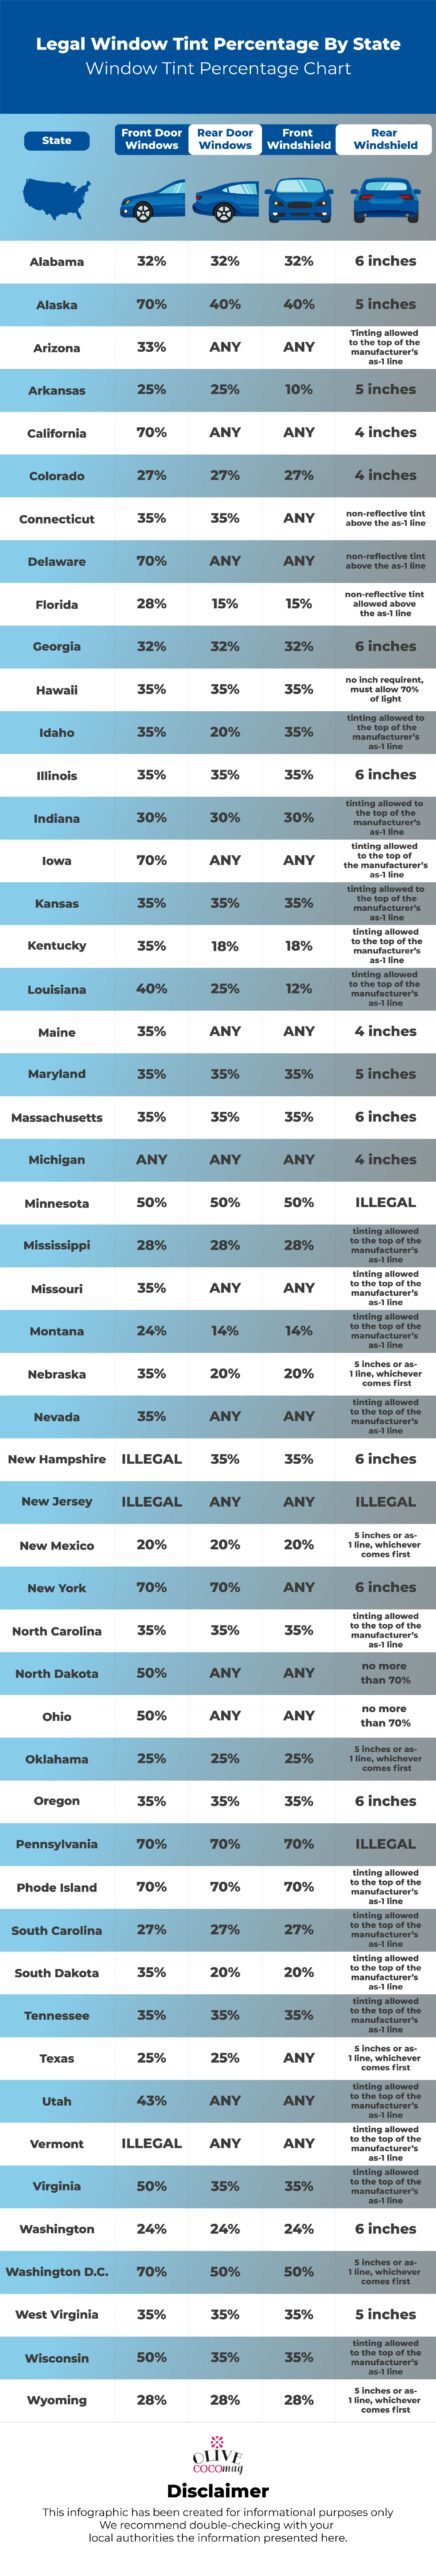 Window-Tint-Laws-By-State